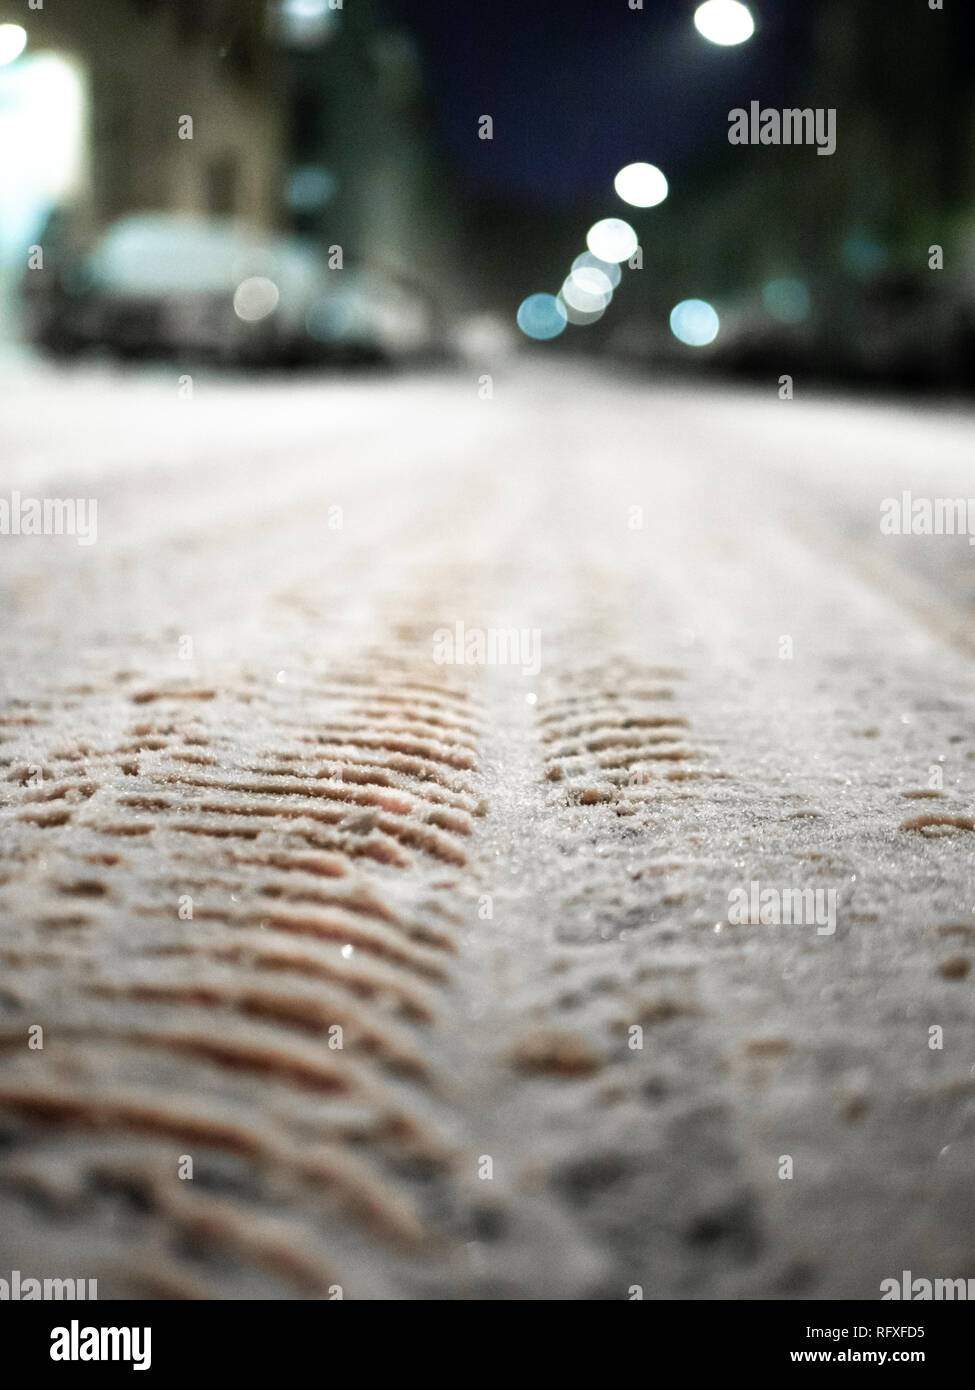 Close up shot of snowy street with tire marks, cars and street lights in background out of focus Stock Photo